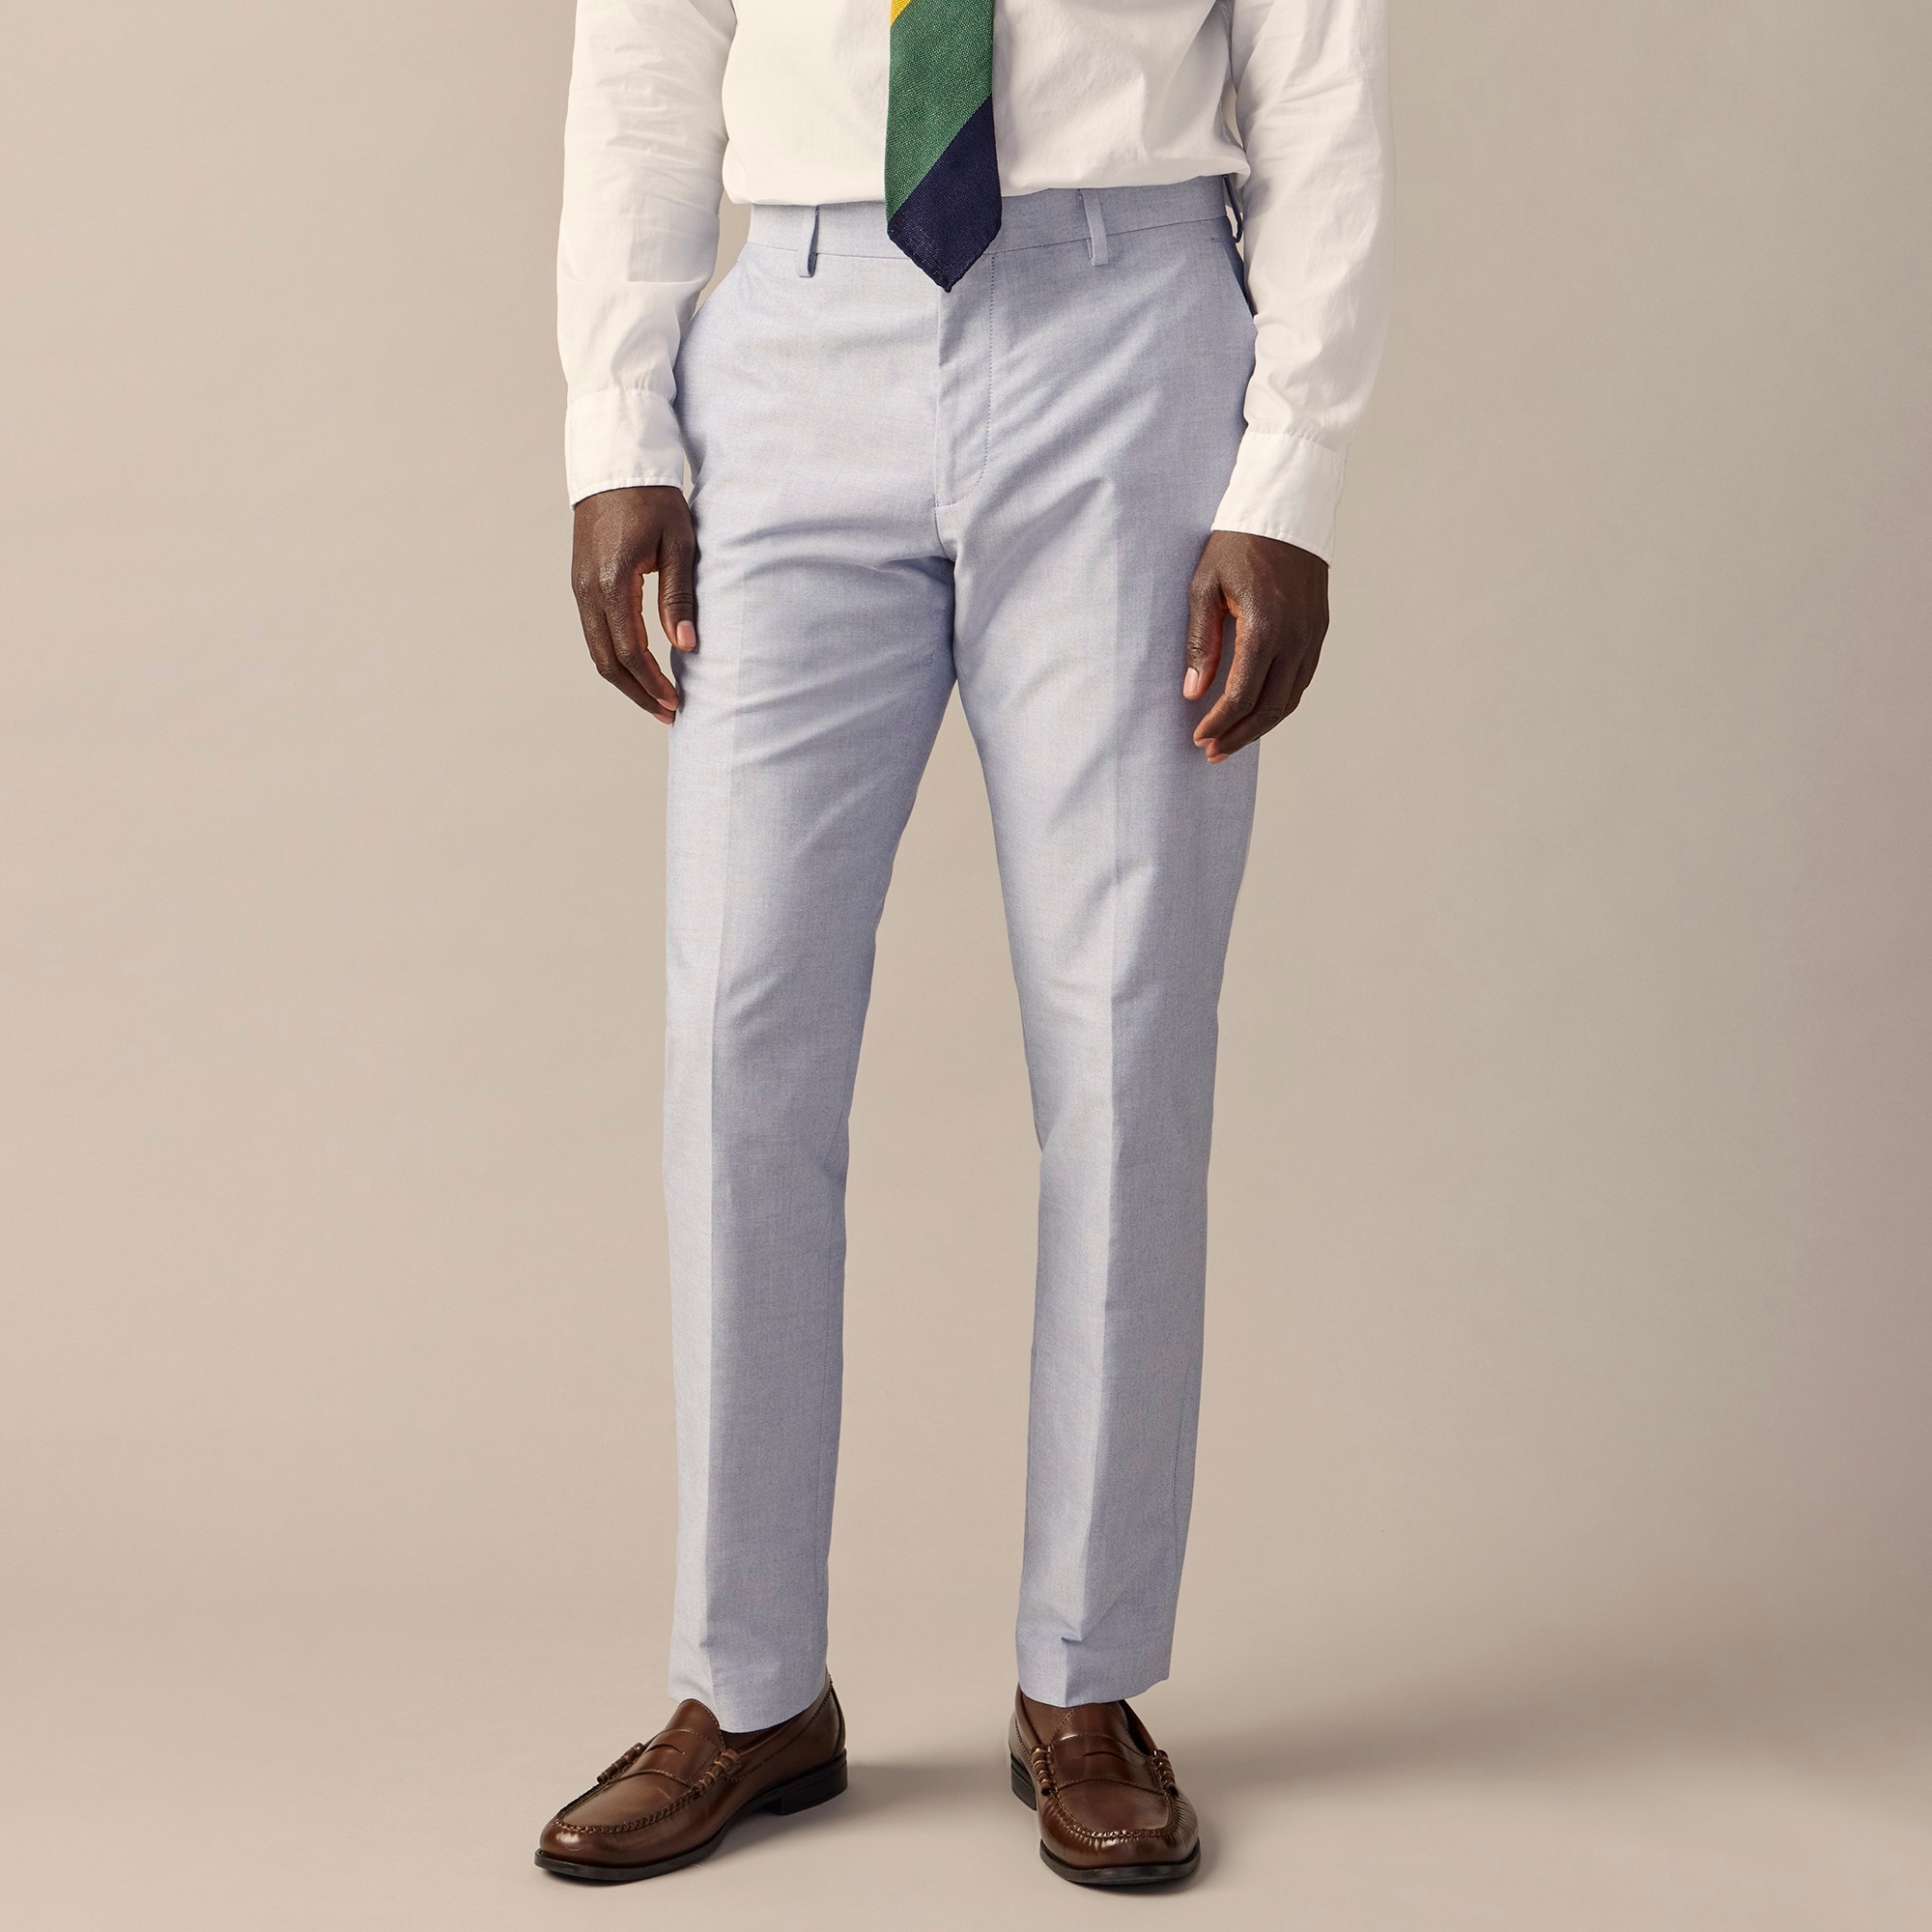 j.crew: crosby classic-fit suit jacket in portuguese cotton oxford for men